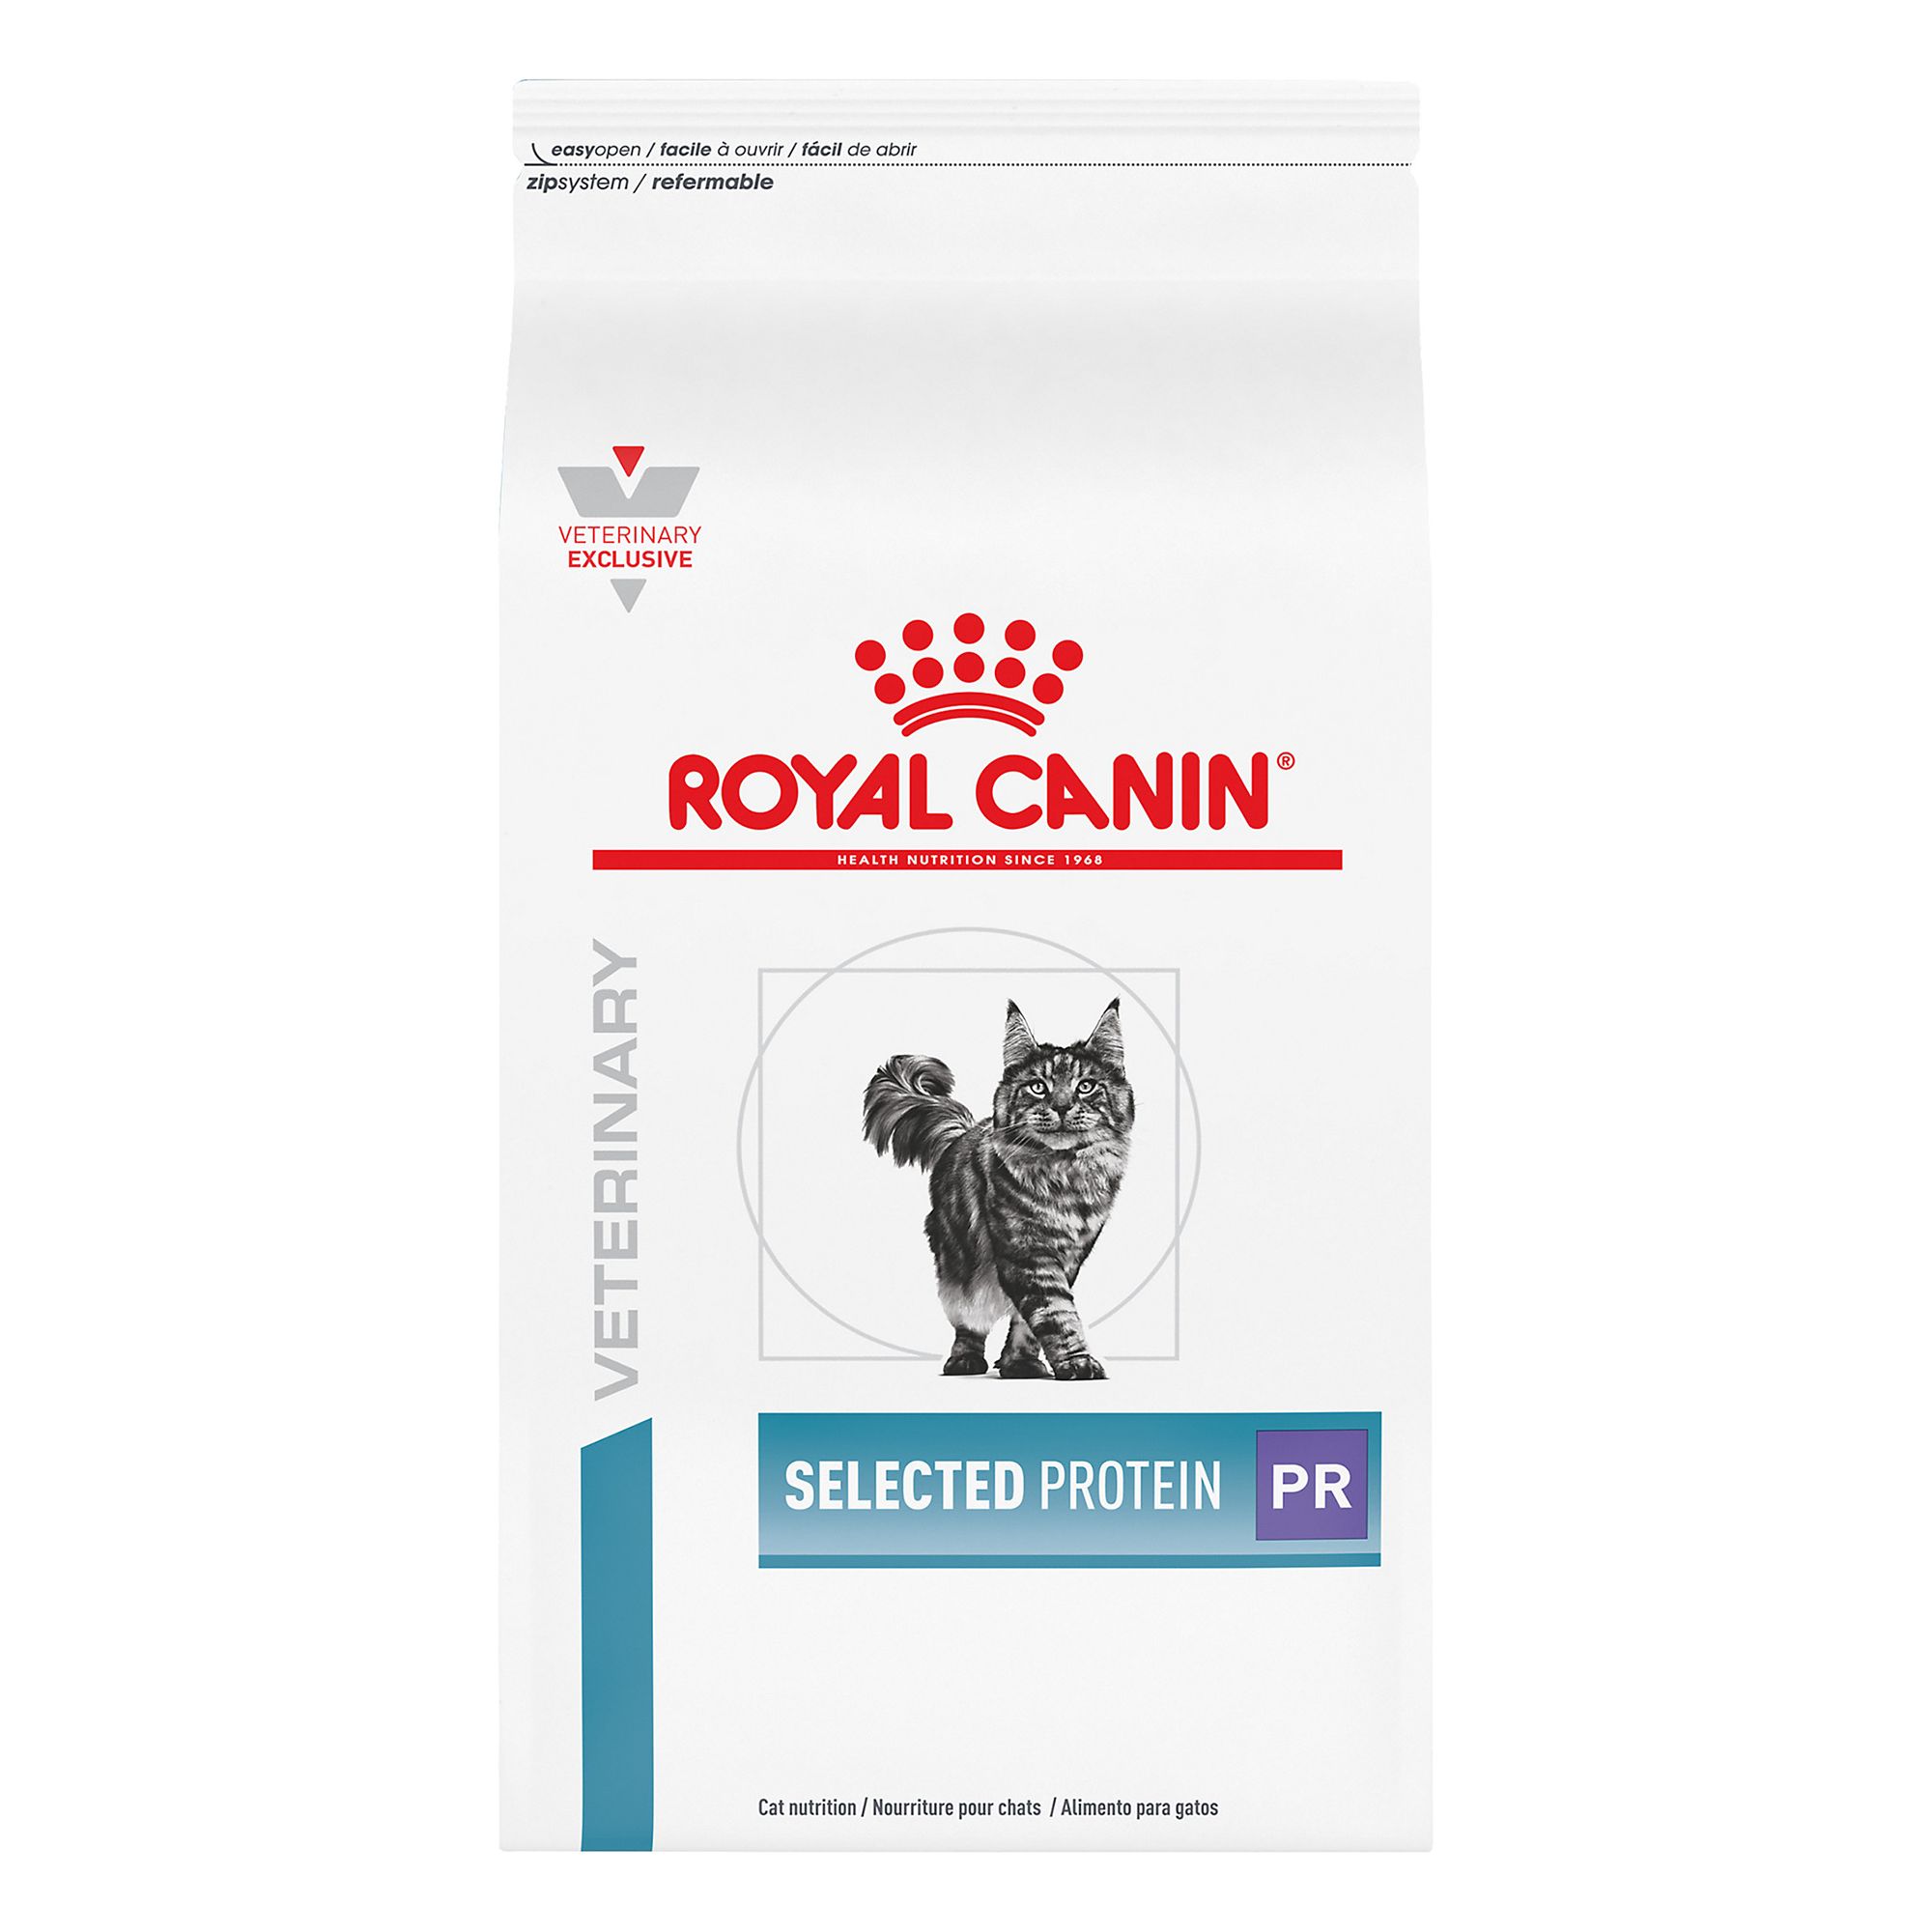 royal canin selected protein canned dog food